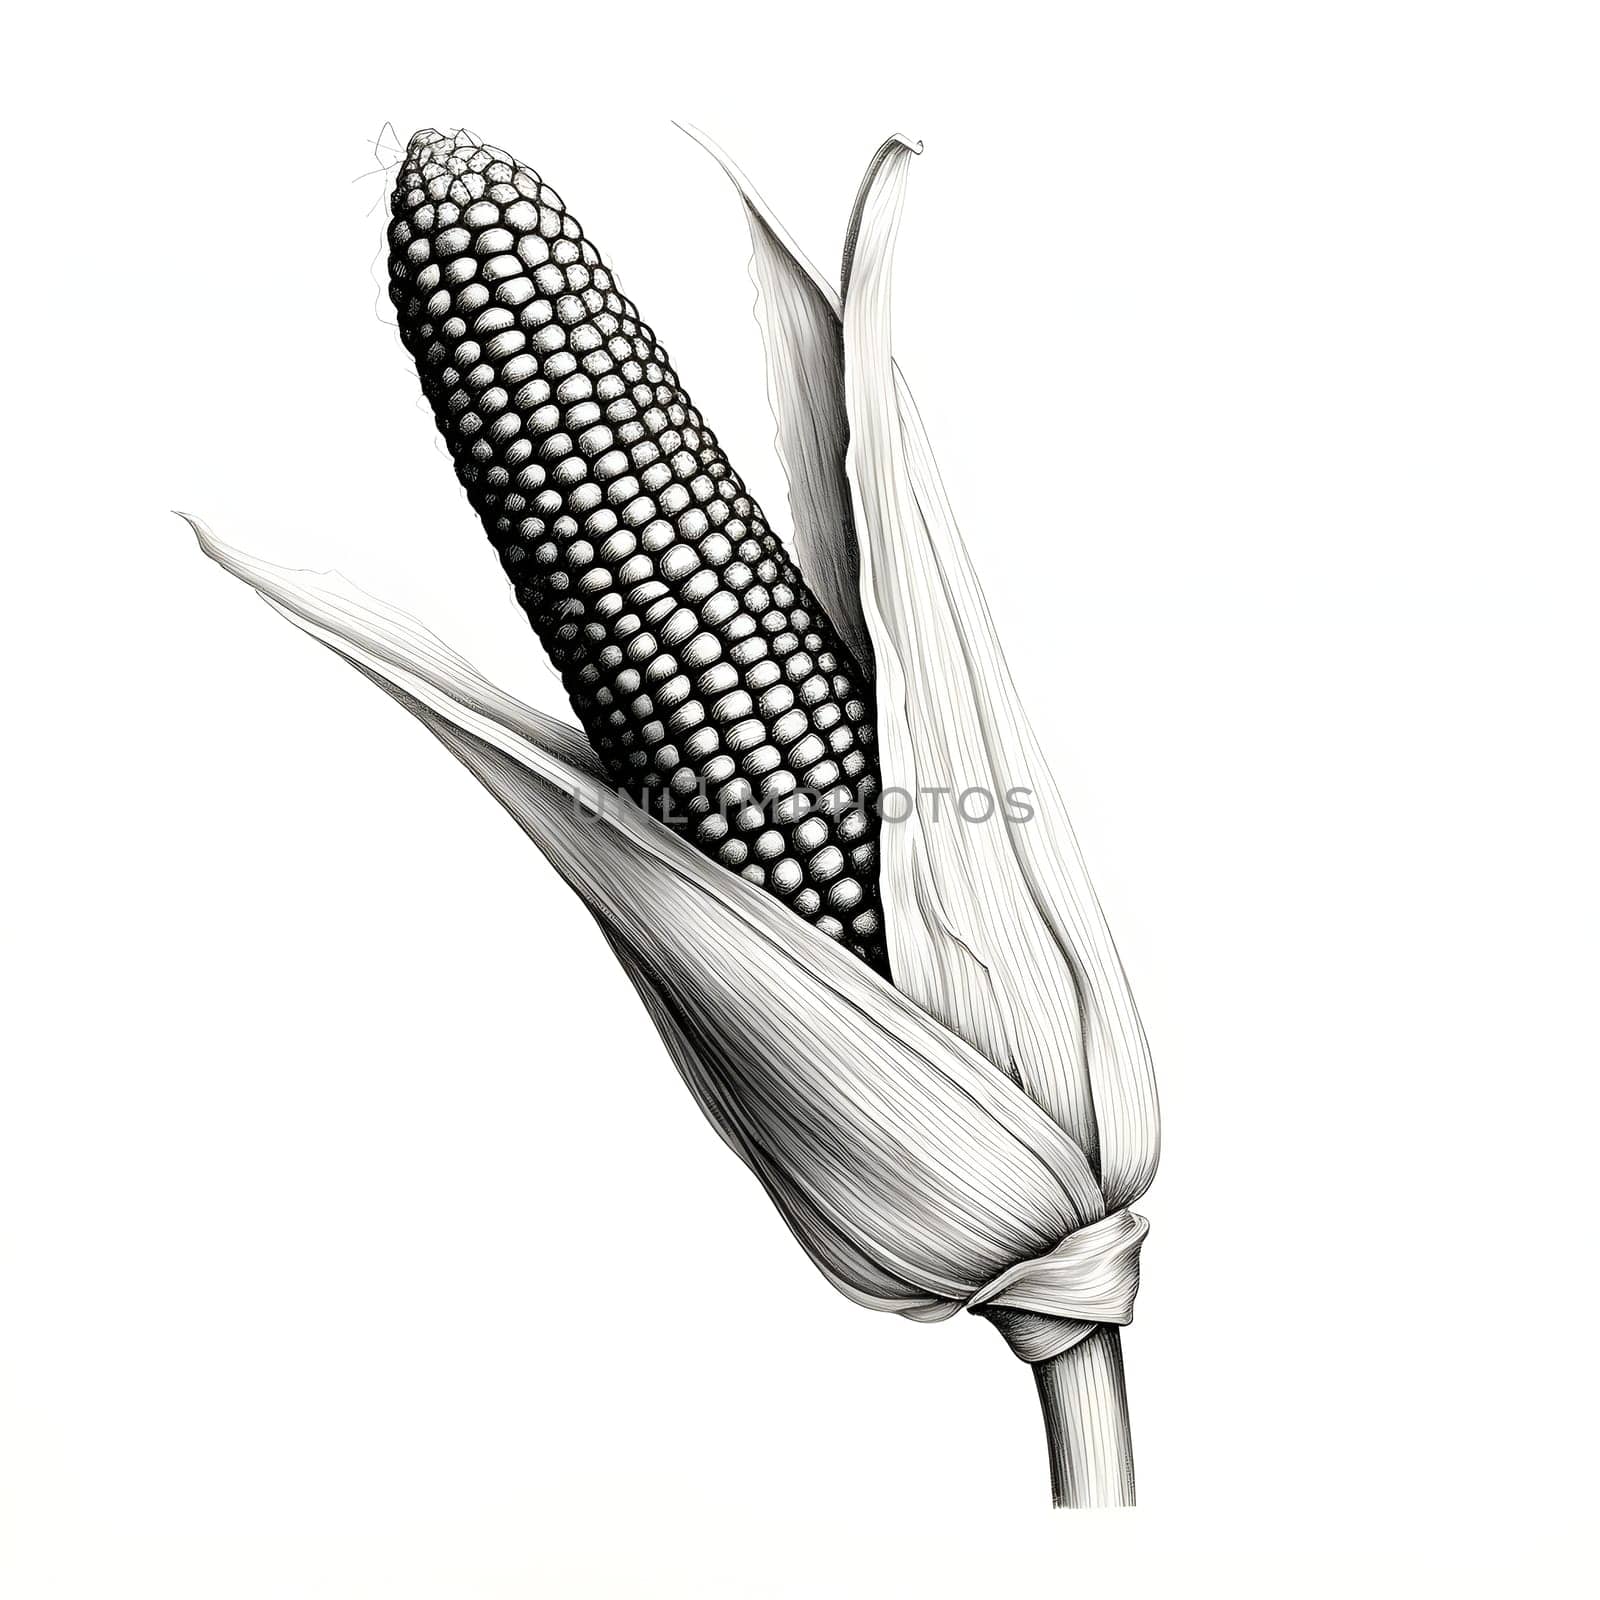 Black and White corn cob in leaf with stalk. Corn as a dish of thanksgiving for the harvest, picture on a white isolated background. An atmosphere of joy and celebration.